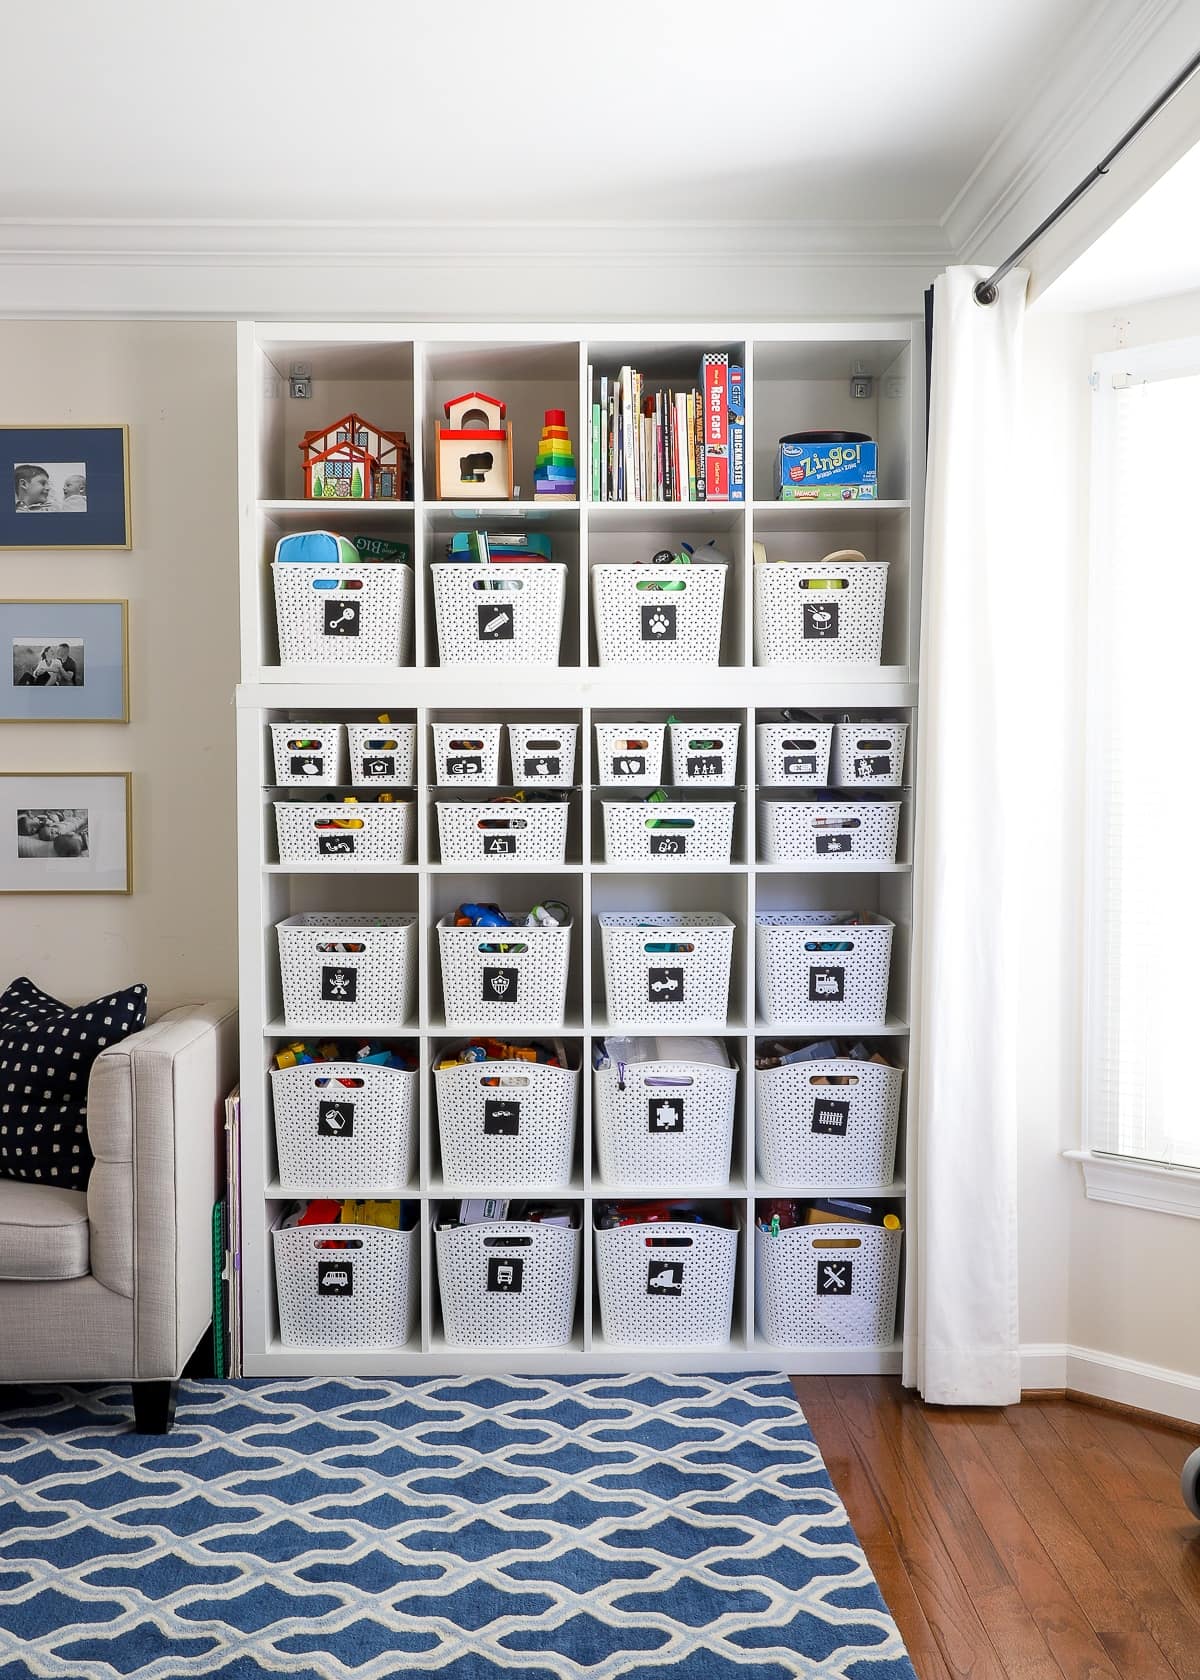 https://thehomesihavemade.com/toy-storage-ideas_2/